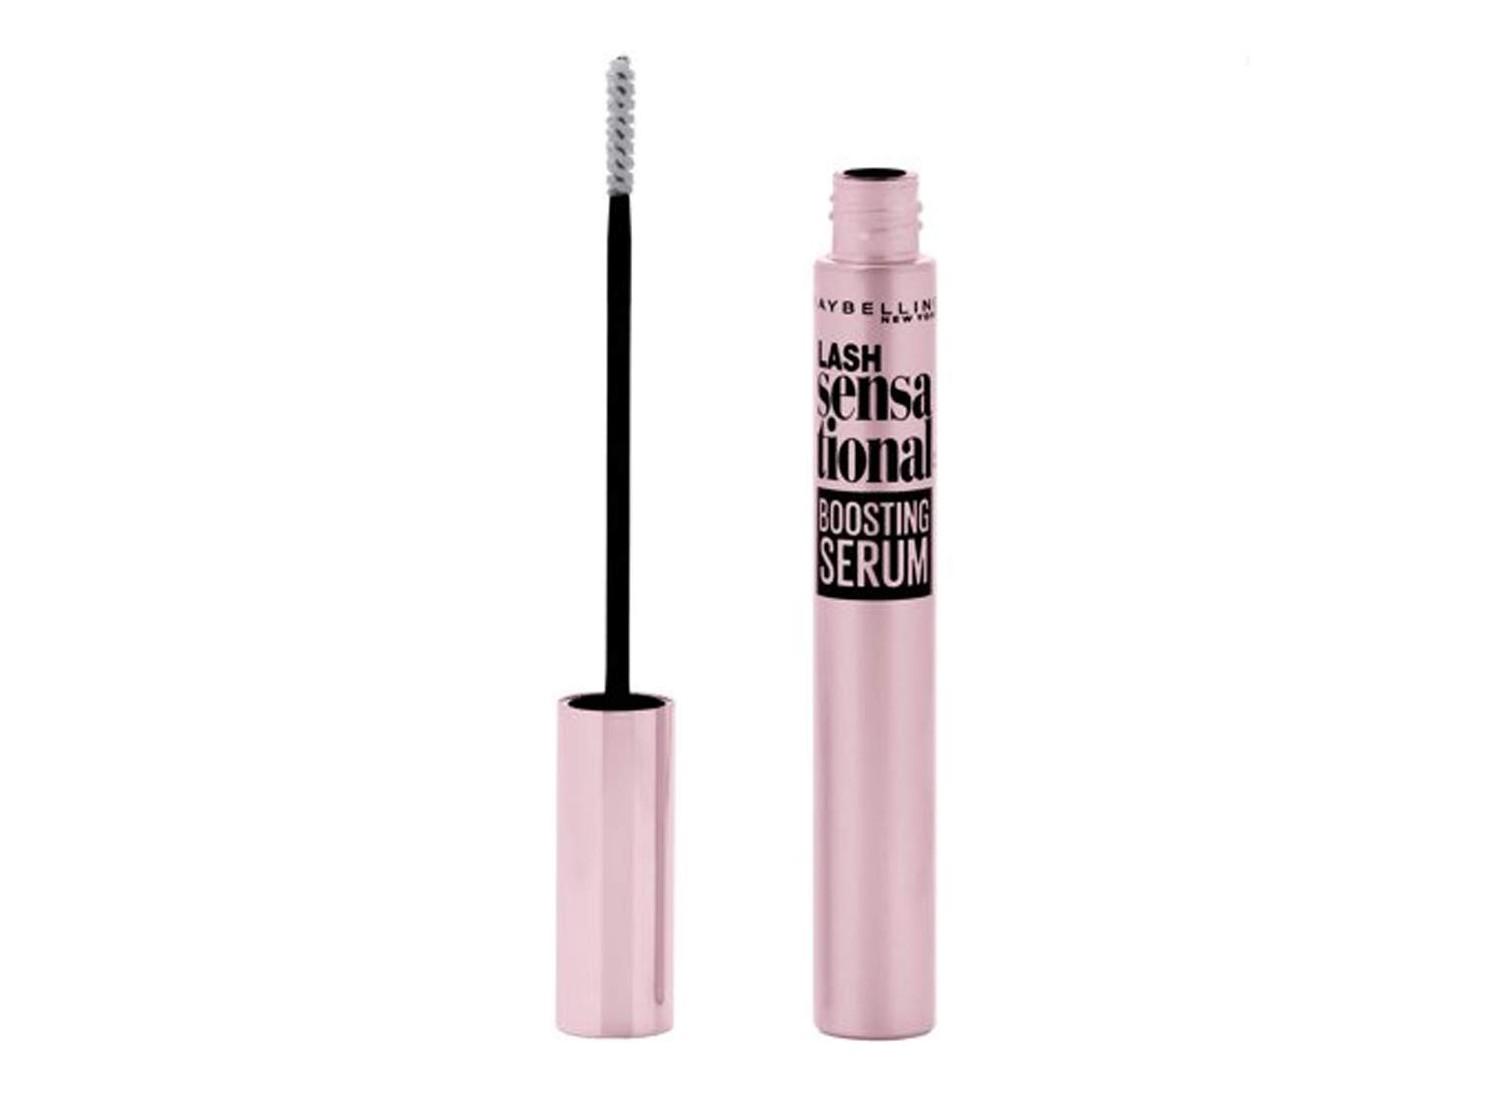 An open Maybelline Lash Serum applicator and lid on a white background.